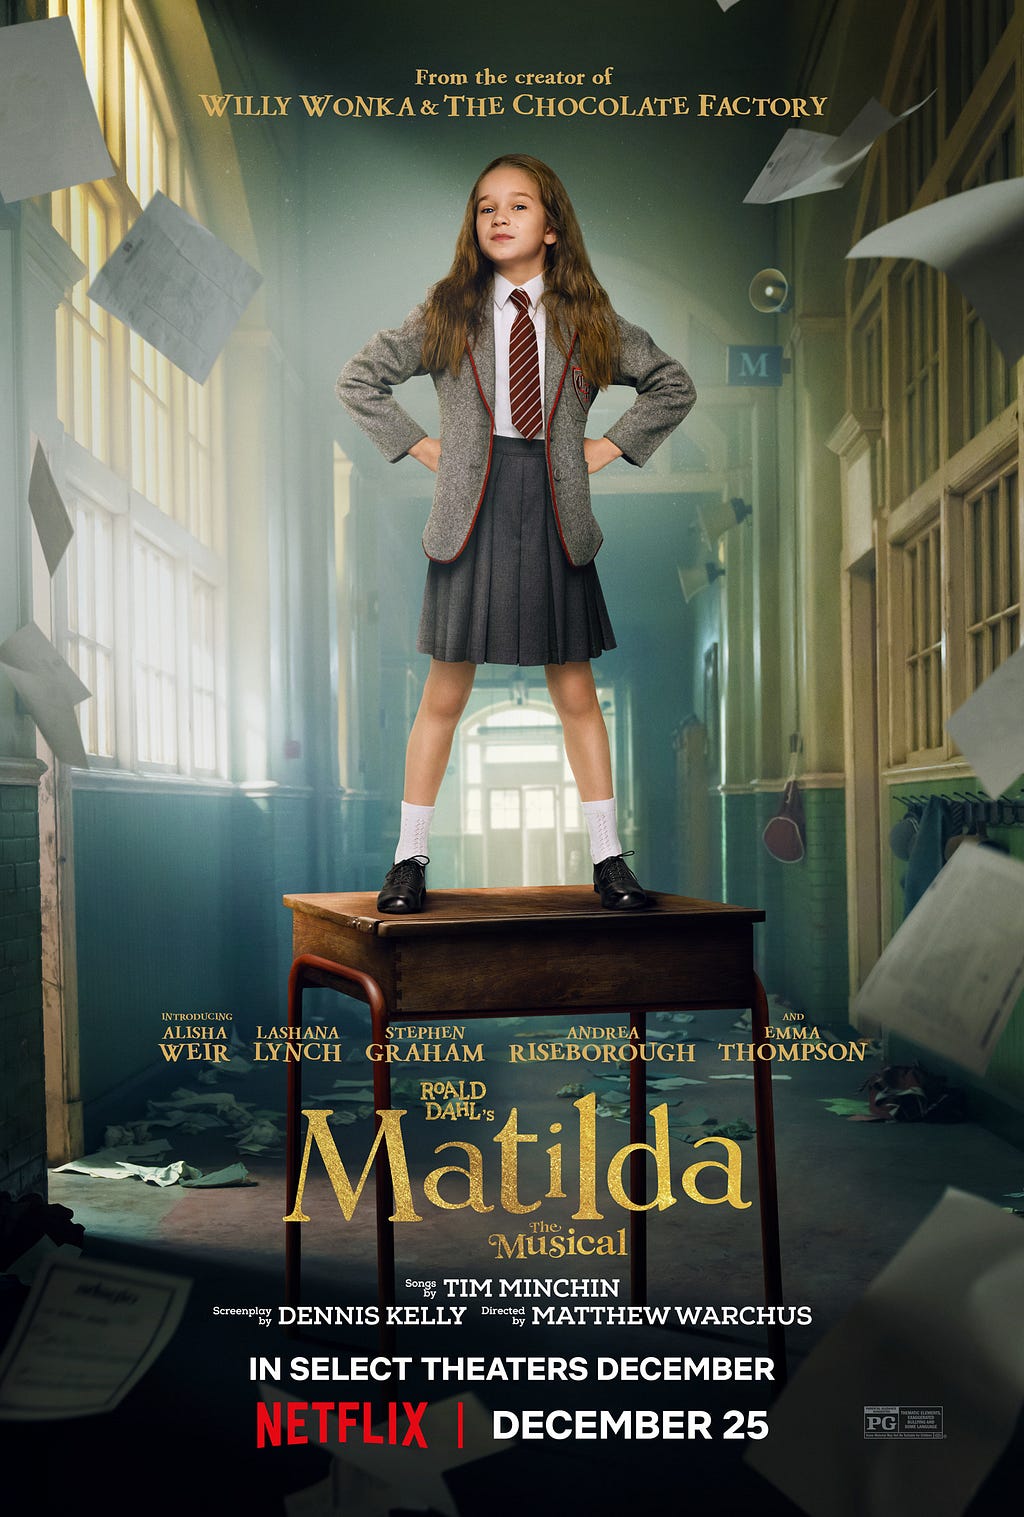 Matilda stands on a desk in a hallway wearing her school uniform. Papers fly around her.